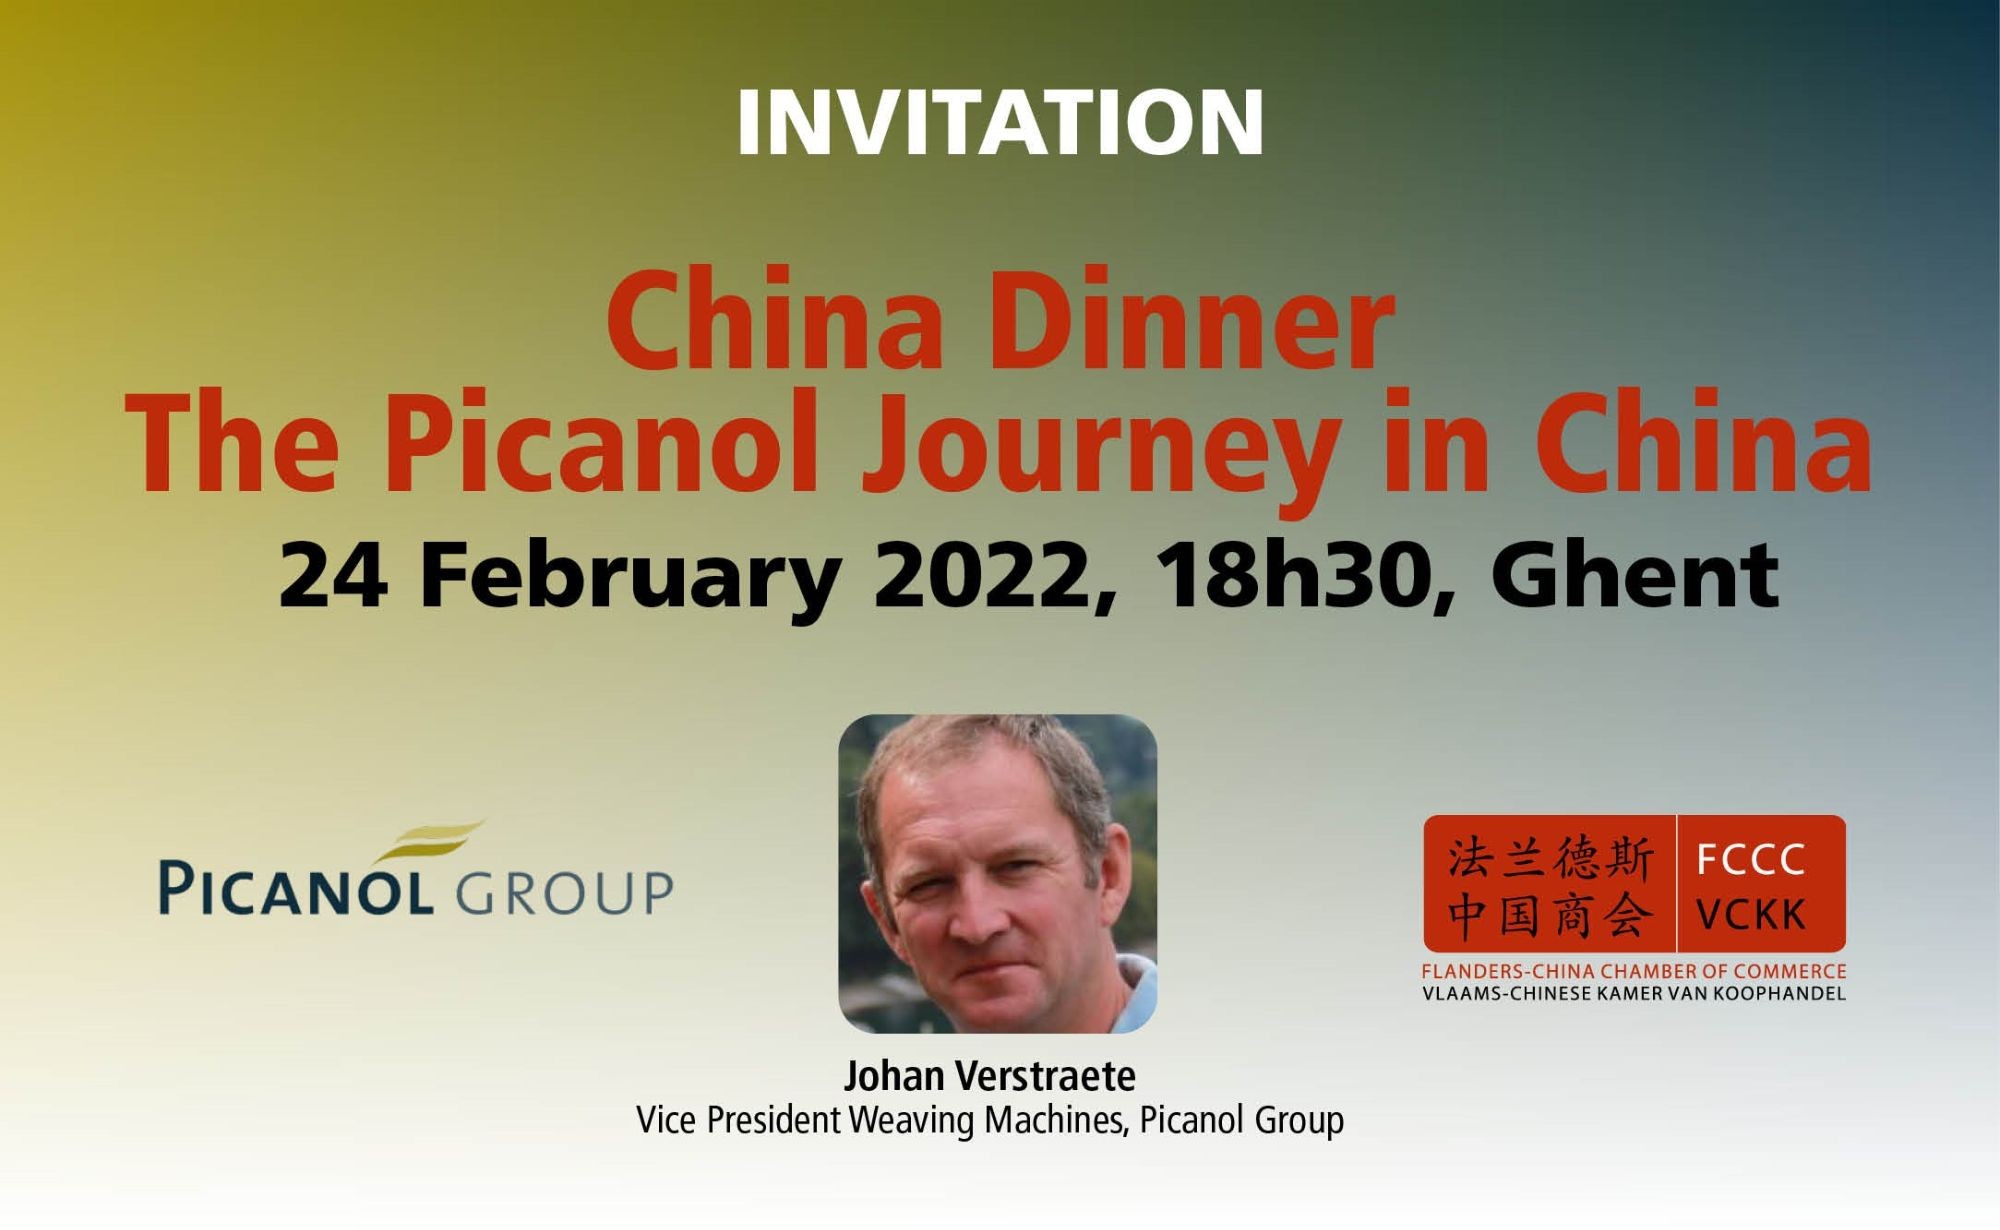 China Dinner: The Picanol Journey in China